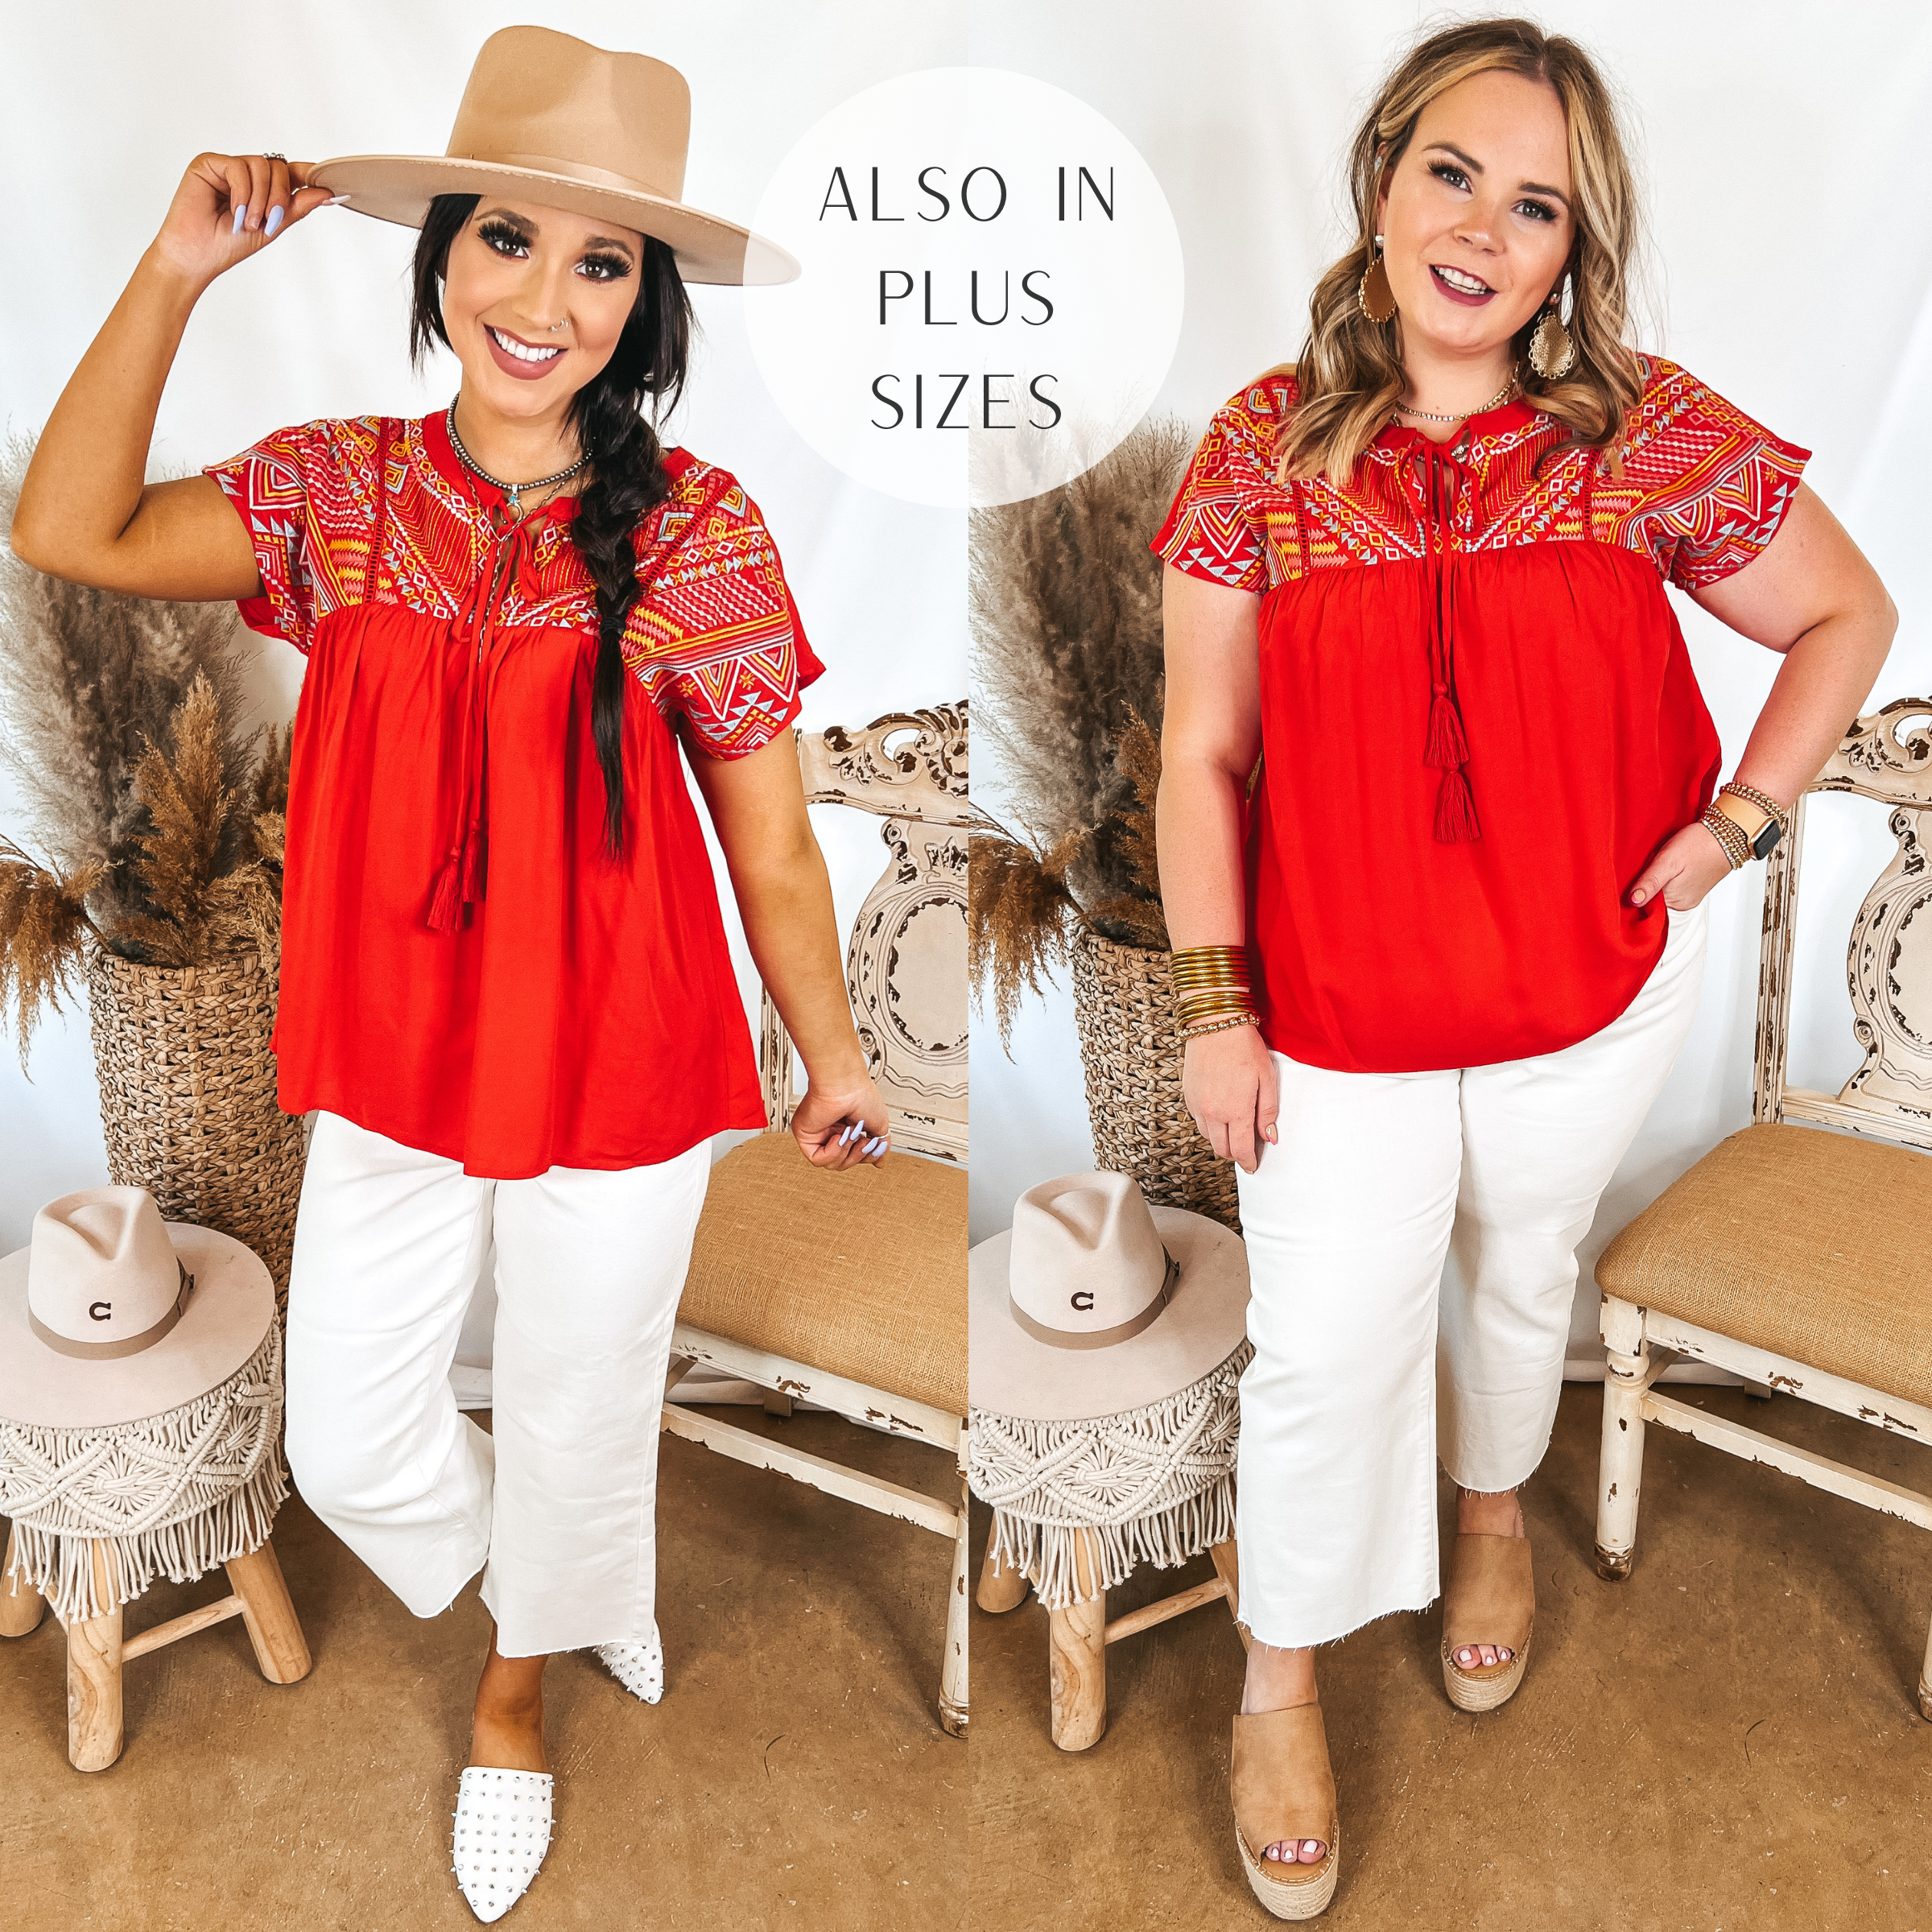 Models are wearing a red short sleeve top that has embroidery on the upper. Both models have it paired with white cropped jeans. Size small model has it paired with white mules, silver jewelry, and a tan hat. Size large model has it paired with tan wedges and gold jewelry.